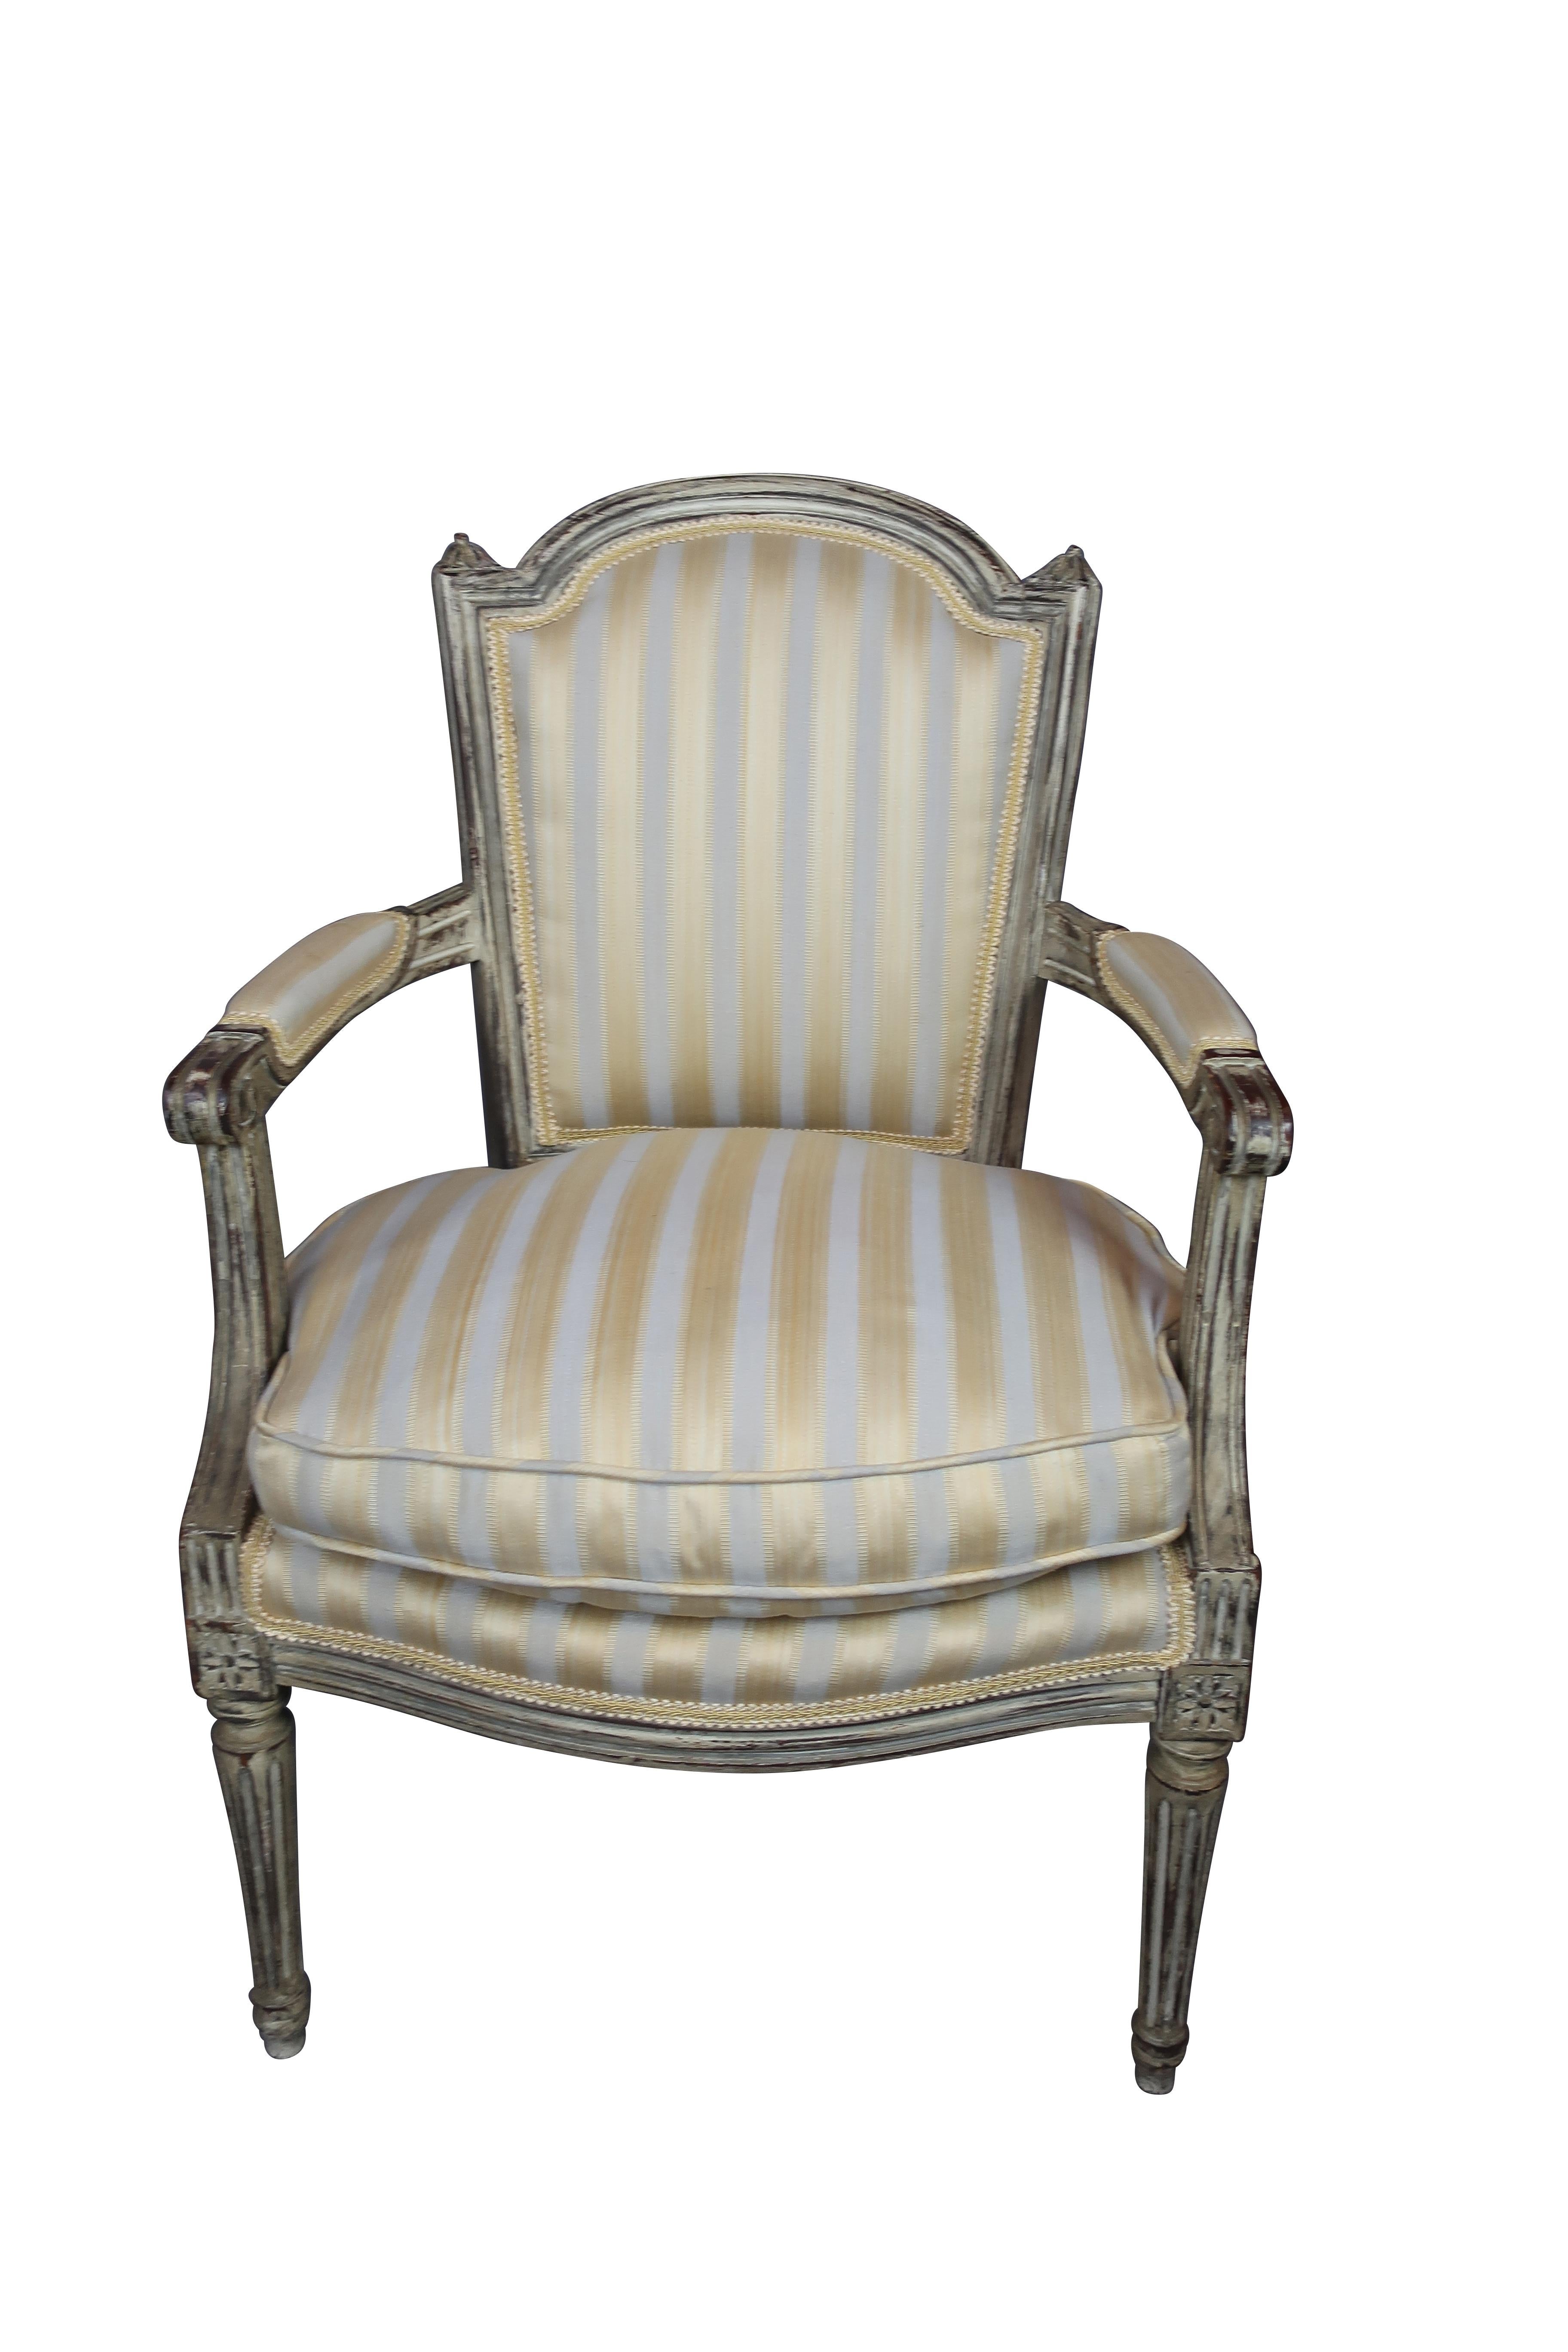 Pair of 19th century French Louis XVI grey painted upholstered chairs, frames with gray paint and gold and grey striped upholstery, padded armrests on carved supports, raised on tapered stop fluted legs, carving in the manner of Jean Baptiste